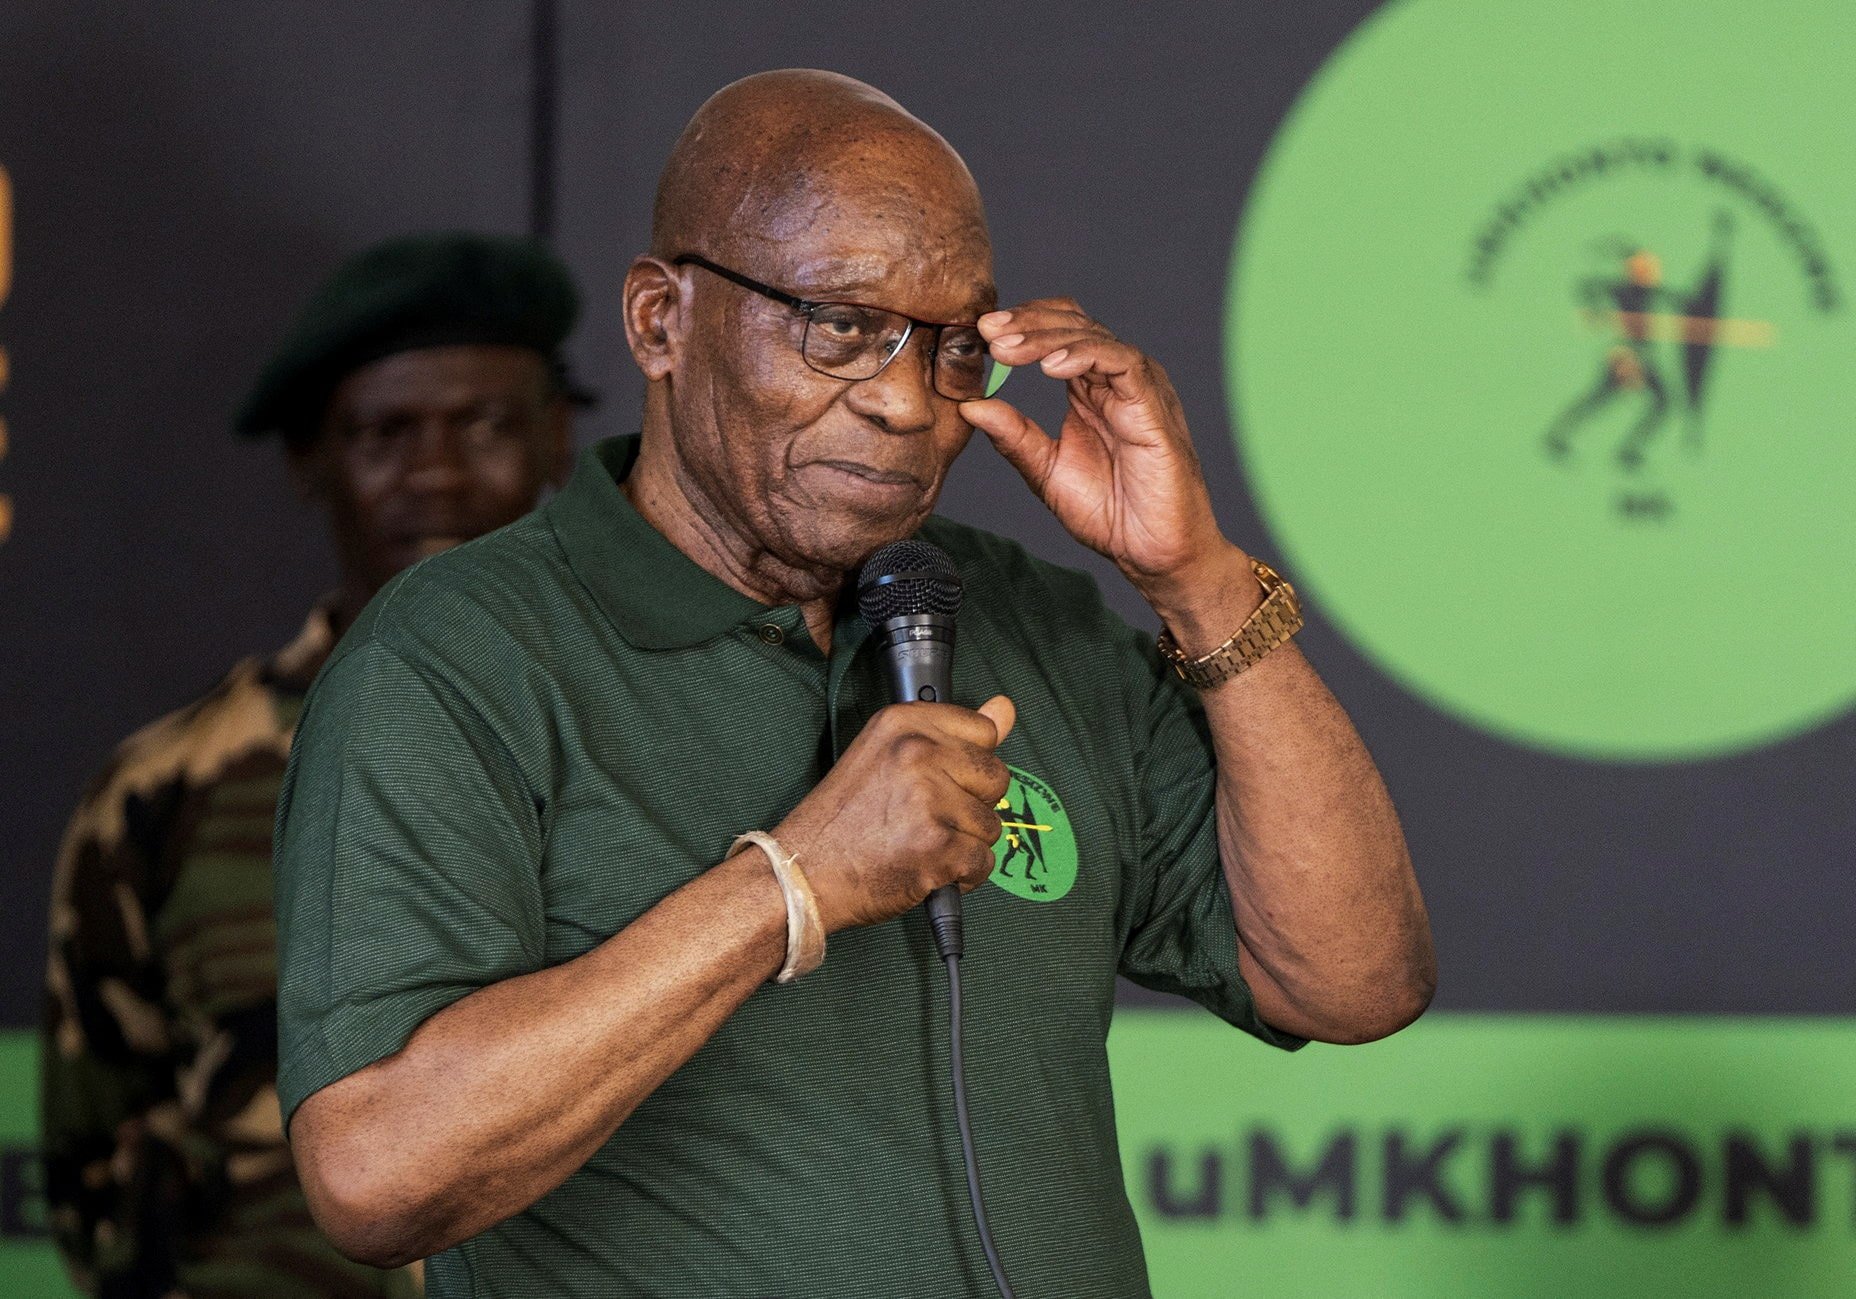 South Africa’s Zuma faces dissent in new party as election nears